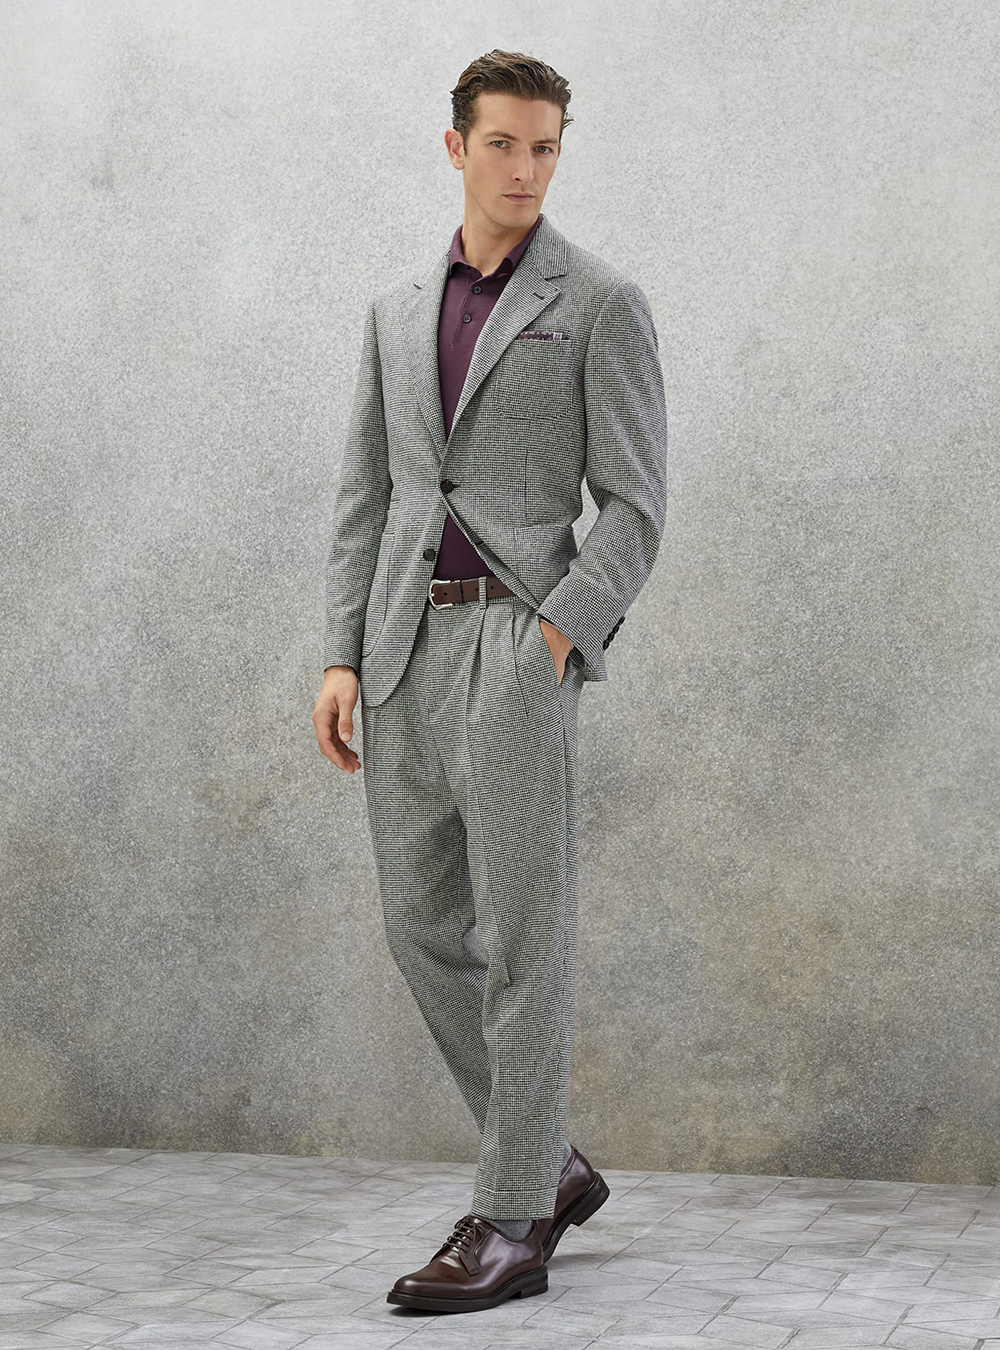 grey houndstooth suit, burgundy polo shirt, and brown derby shoes